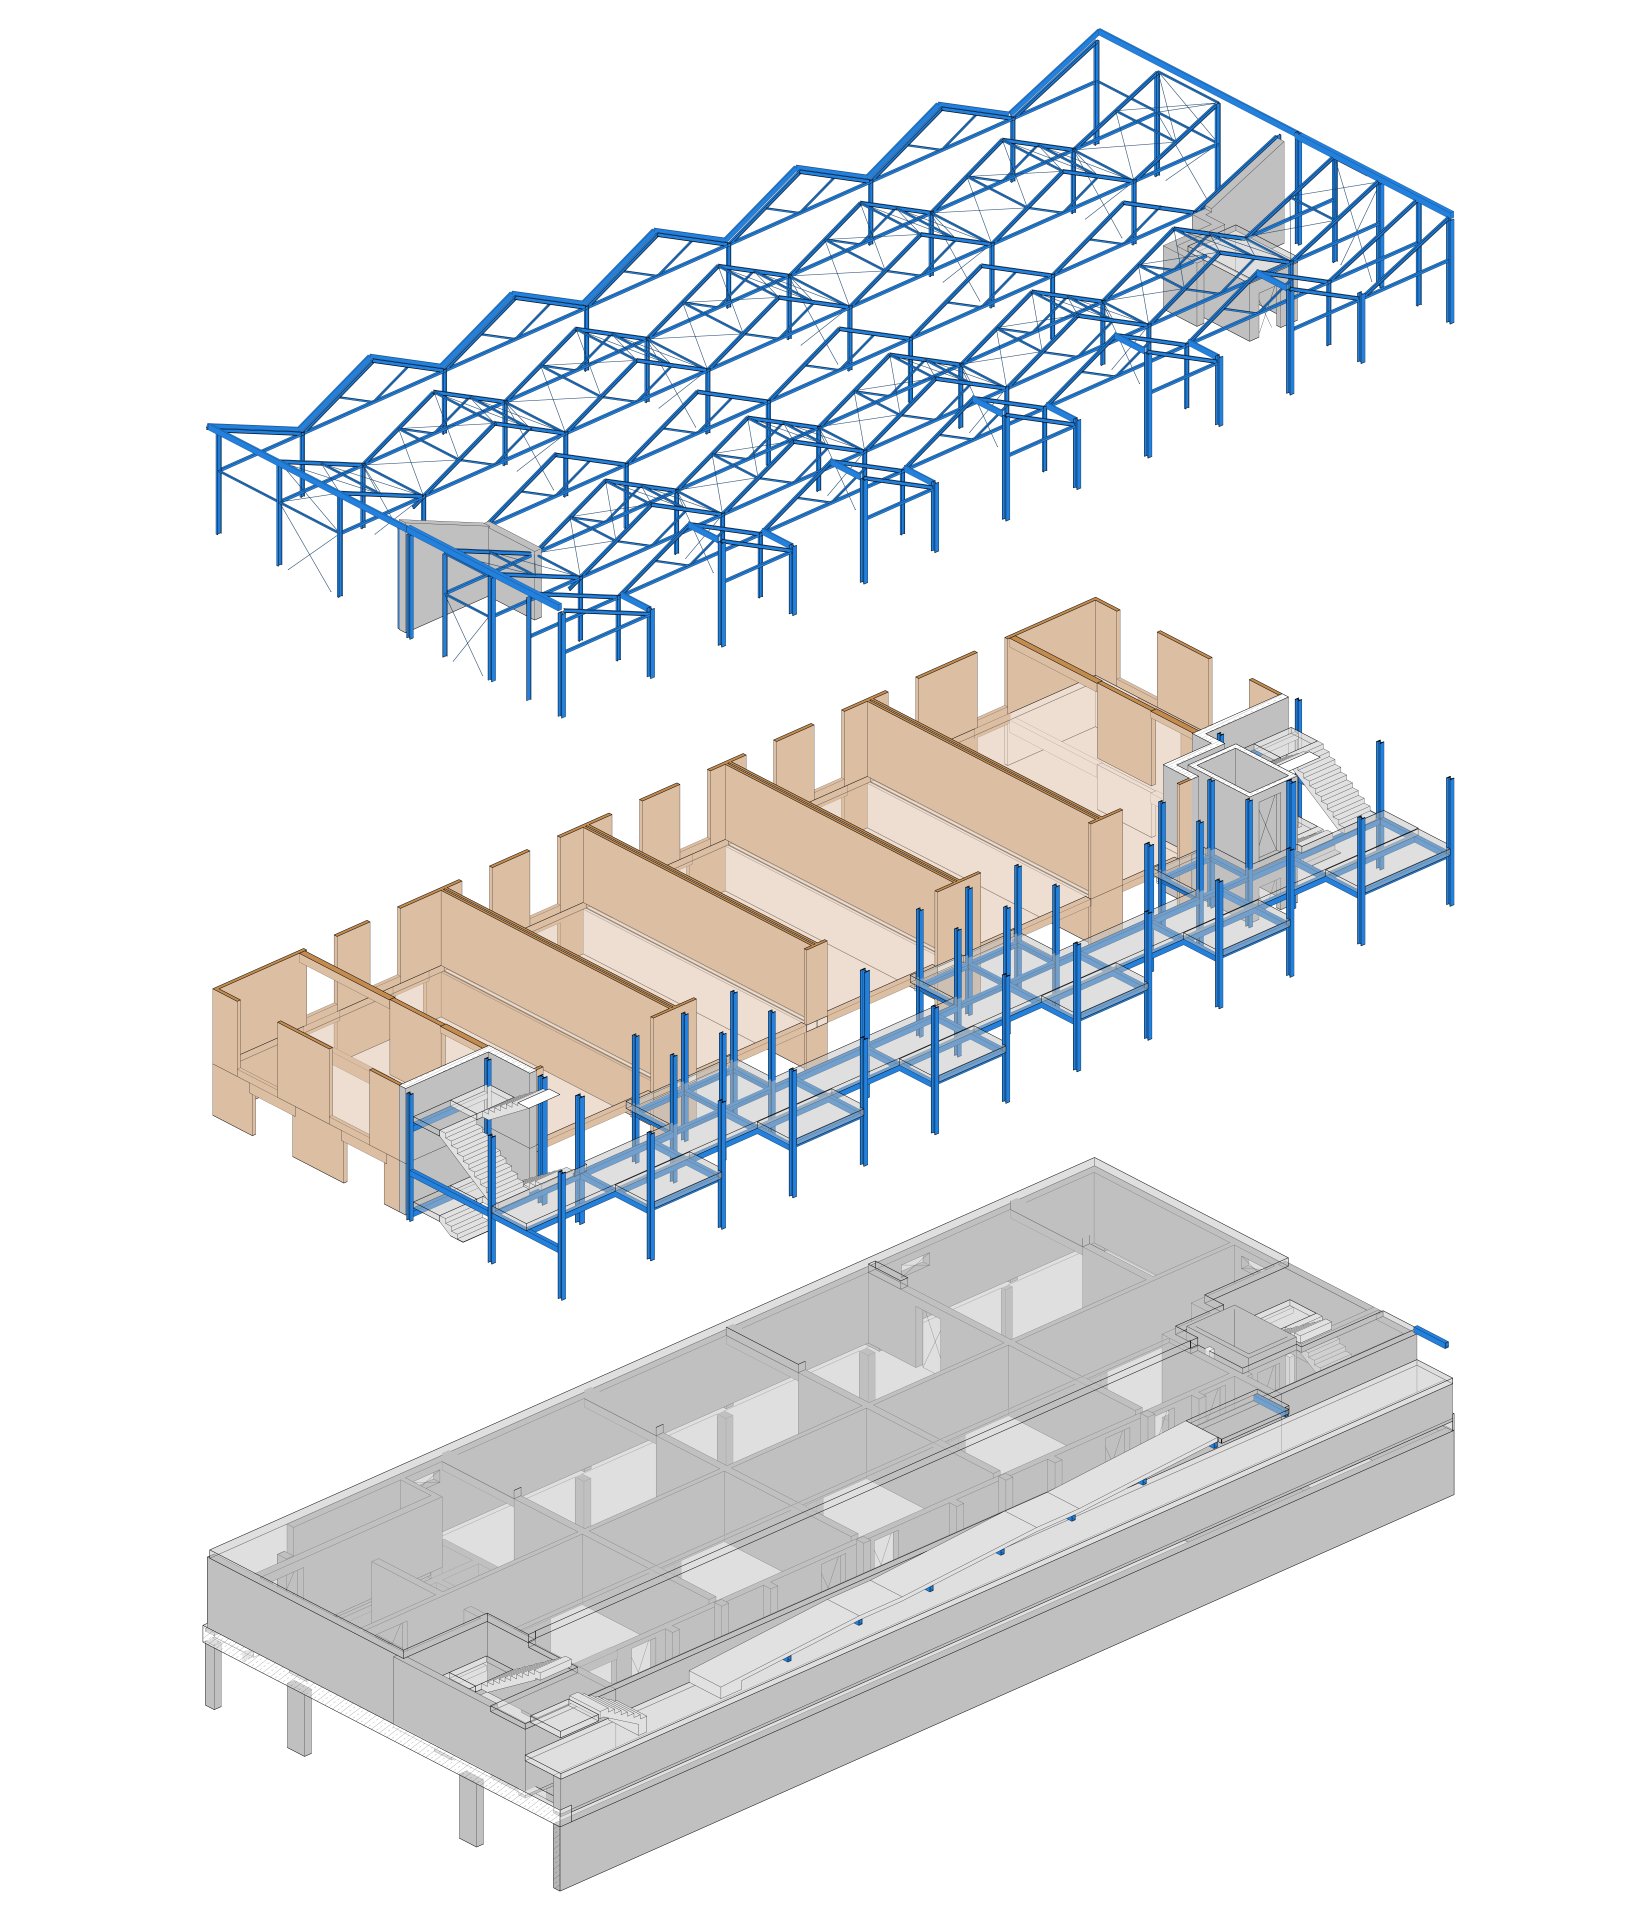 A 3D model of a building in hybrid construction, three levels floating on top of each other, show the materials to be used: reinforced concrete, wood and steel